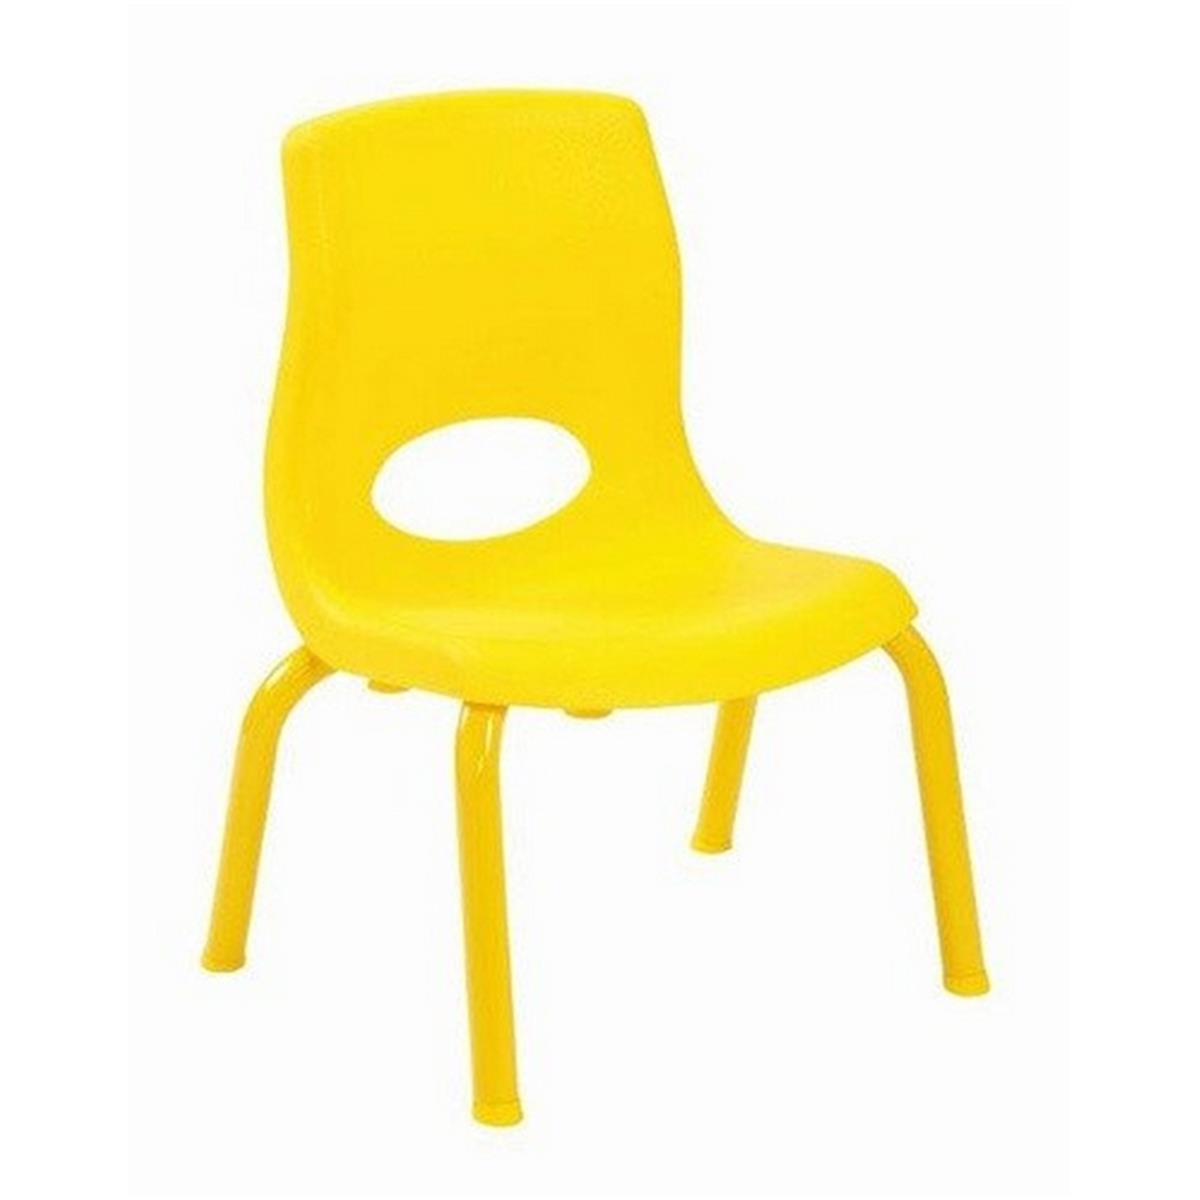 Angeles Ab8012py 12 In. My Posture Chairs, Canary Yellow